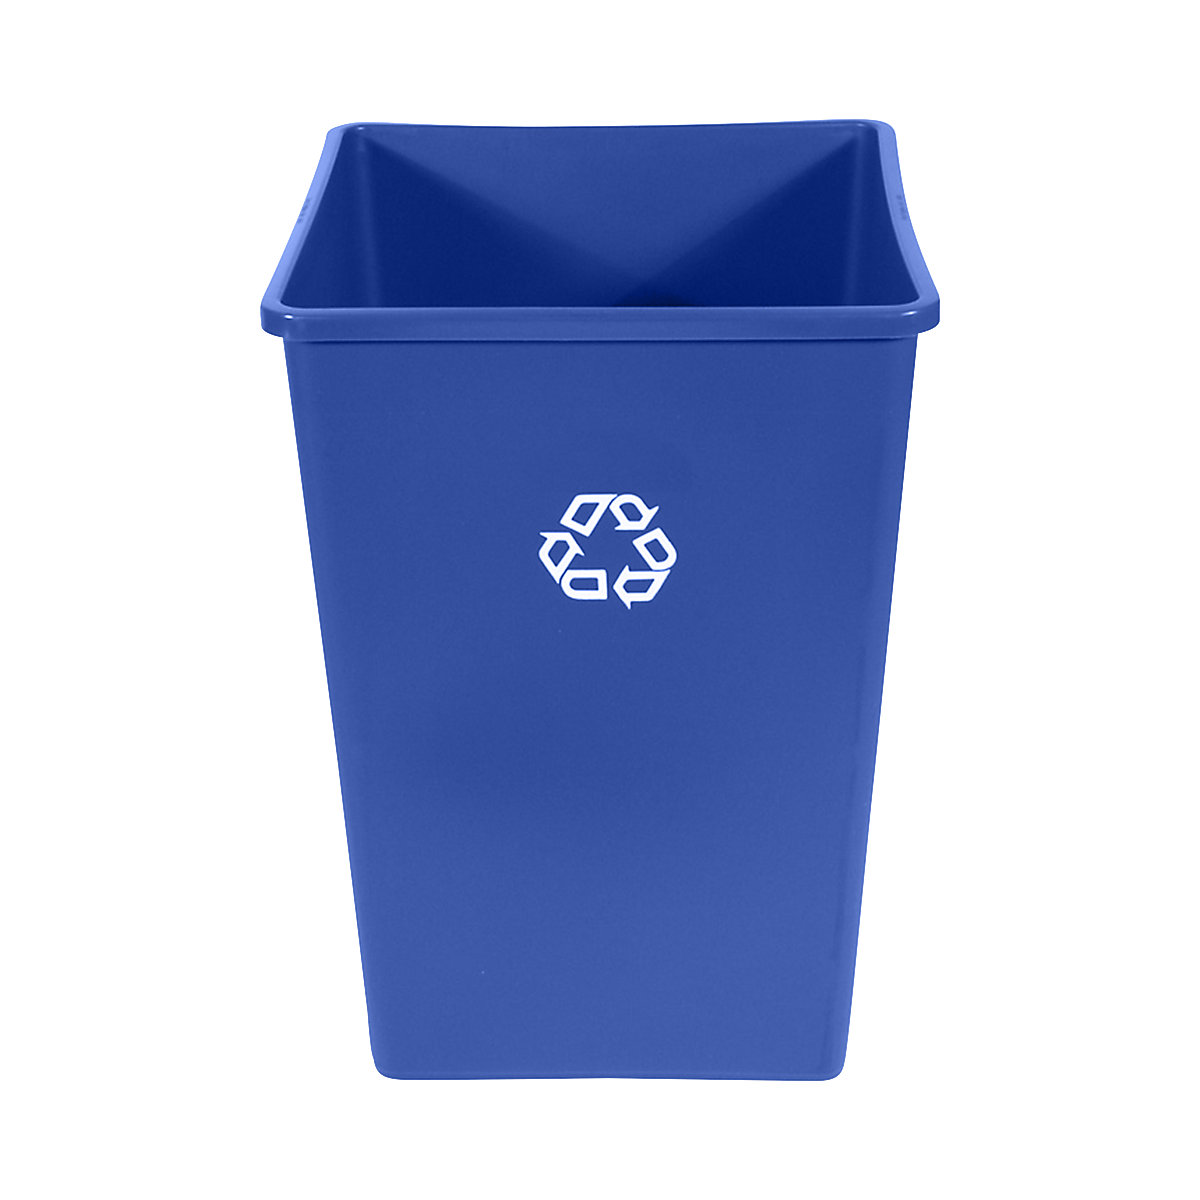 UNTOUCHABLE® recyclable waste container – Rubbermaid, capacity 132 l, square, blue-2